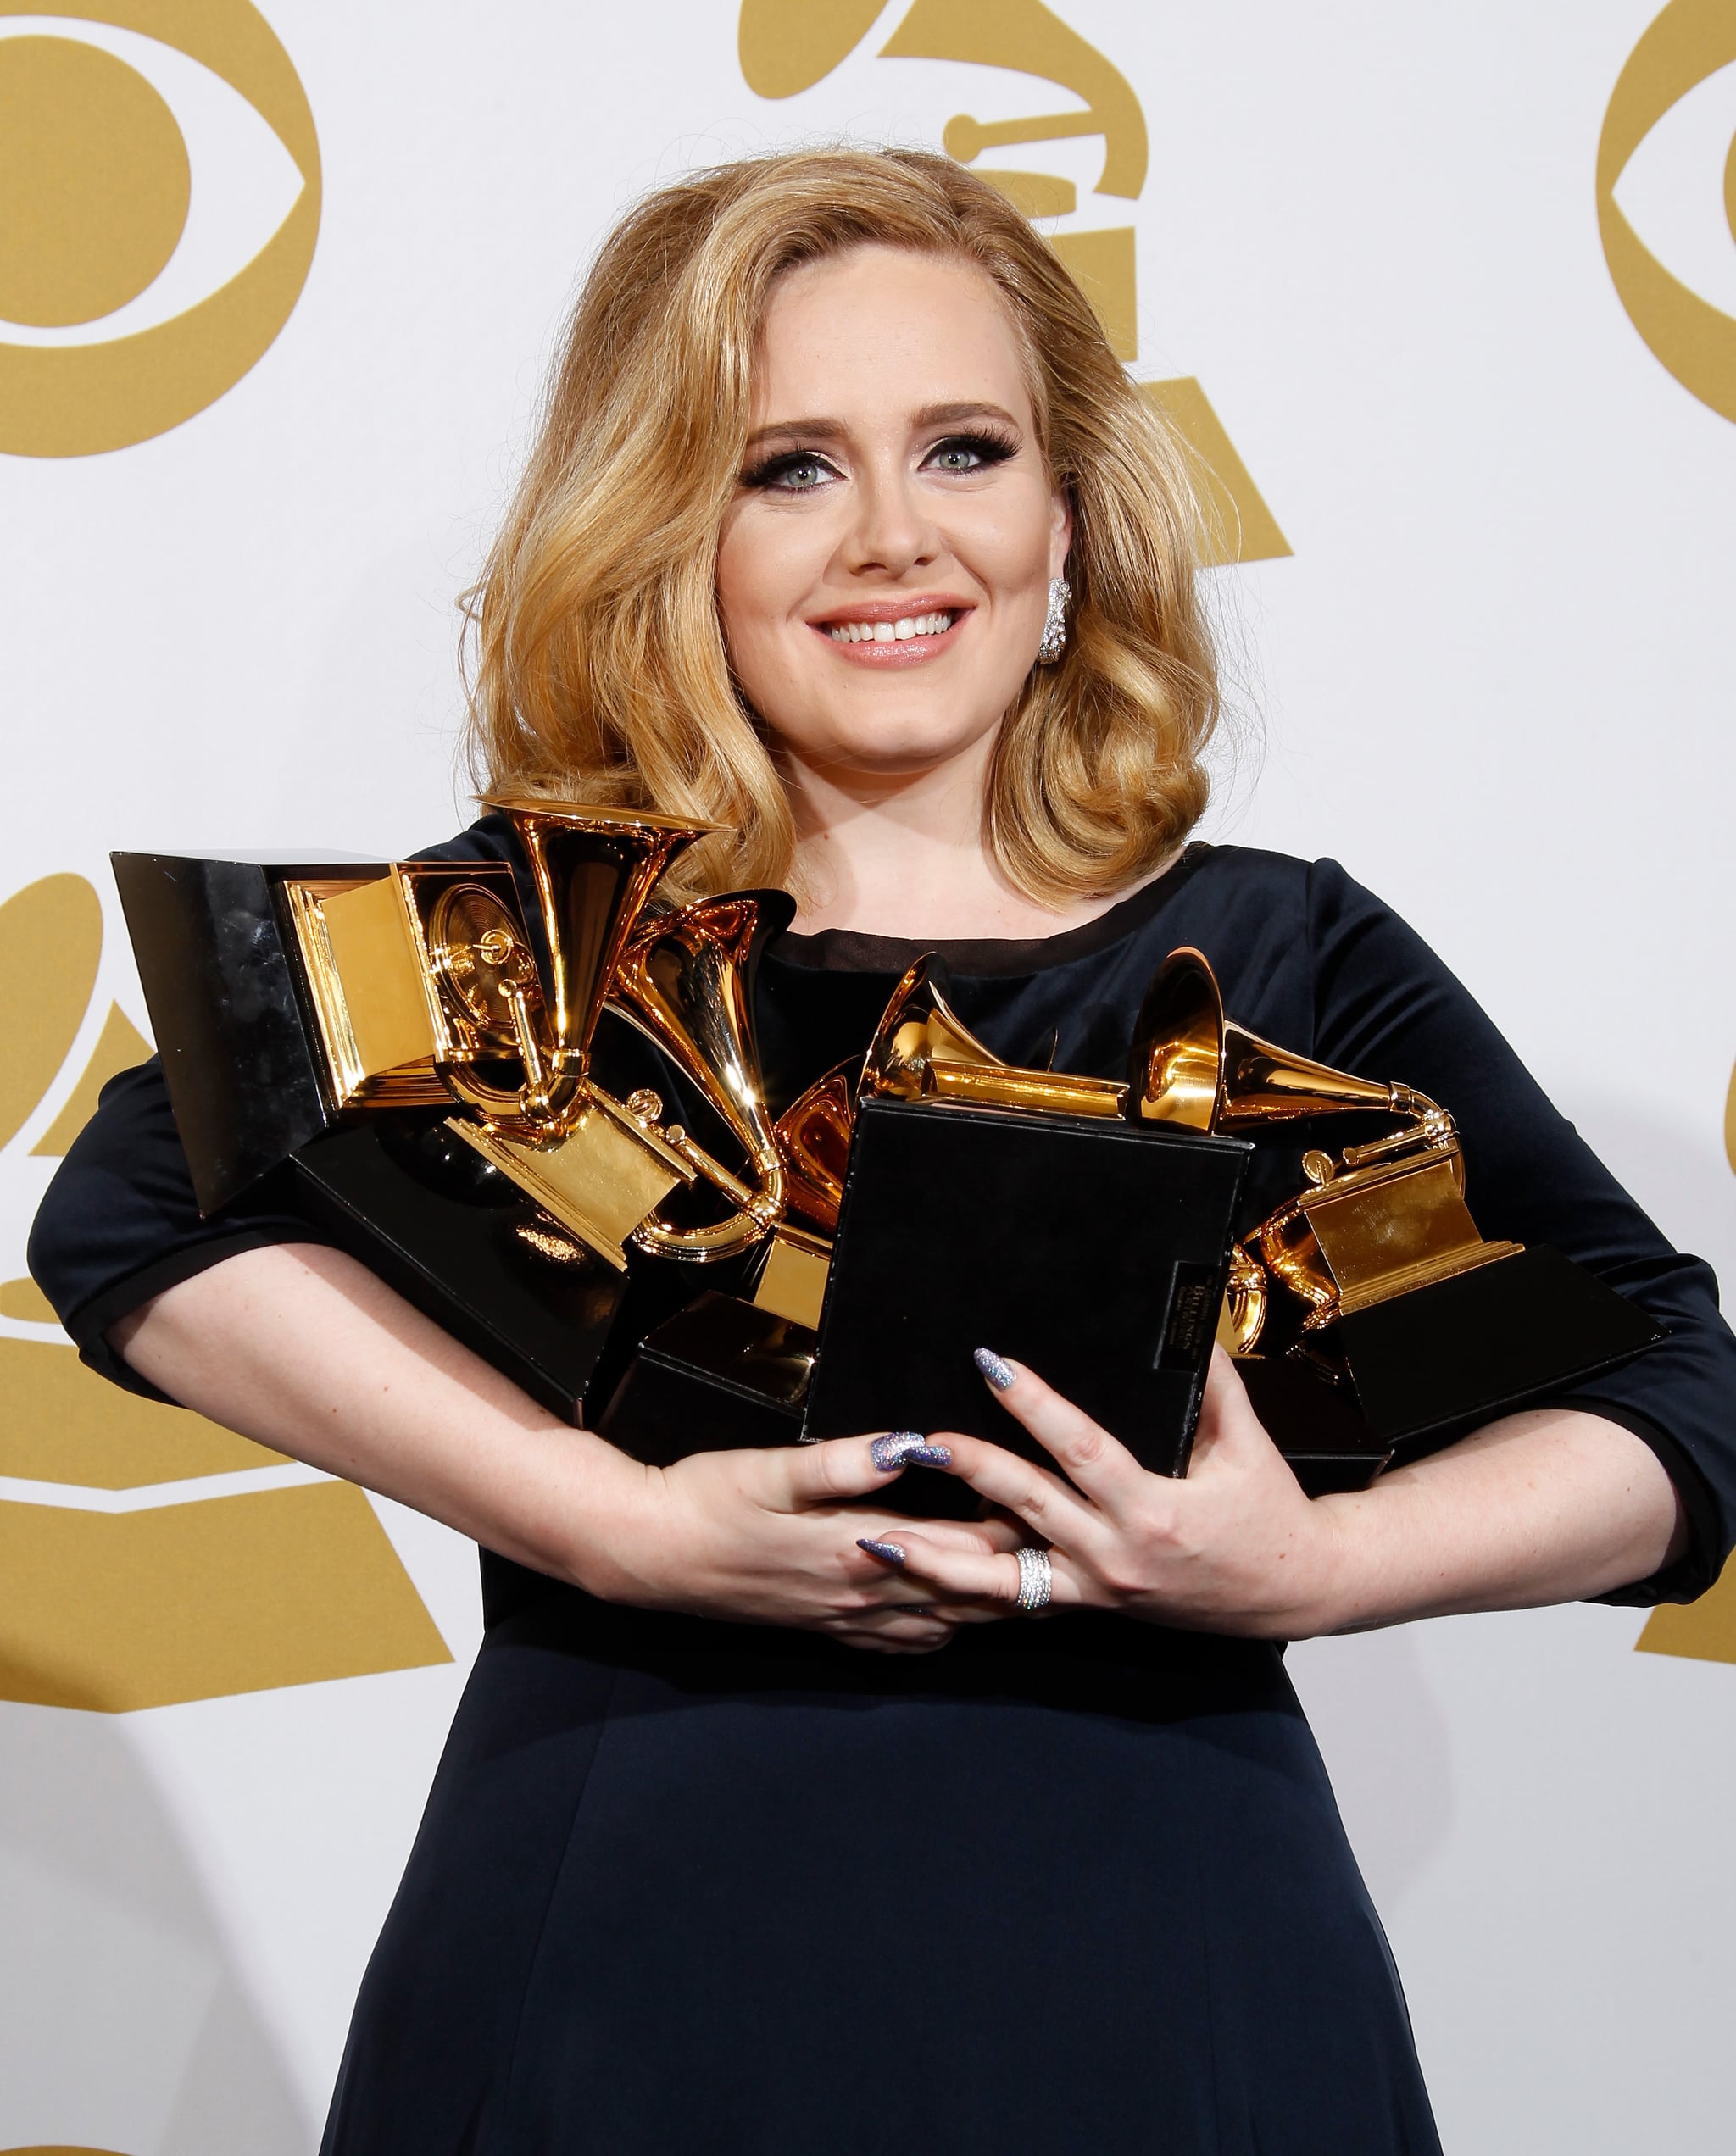 Adele held on to her Grammy Awards in the press room during the 2012 show.